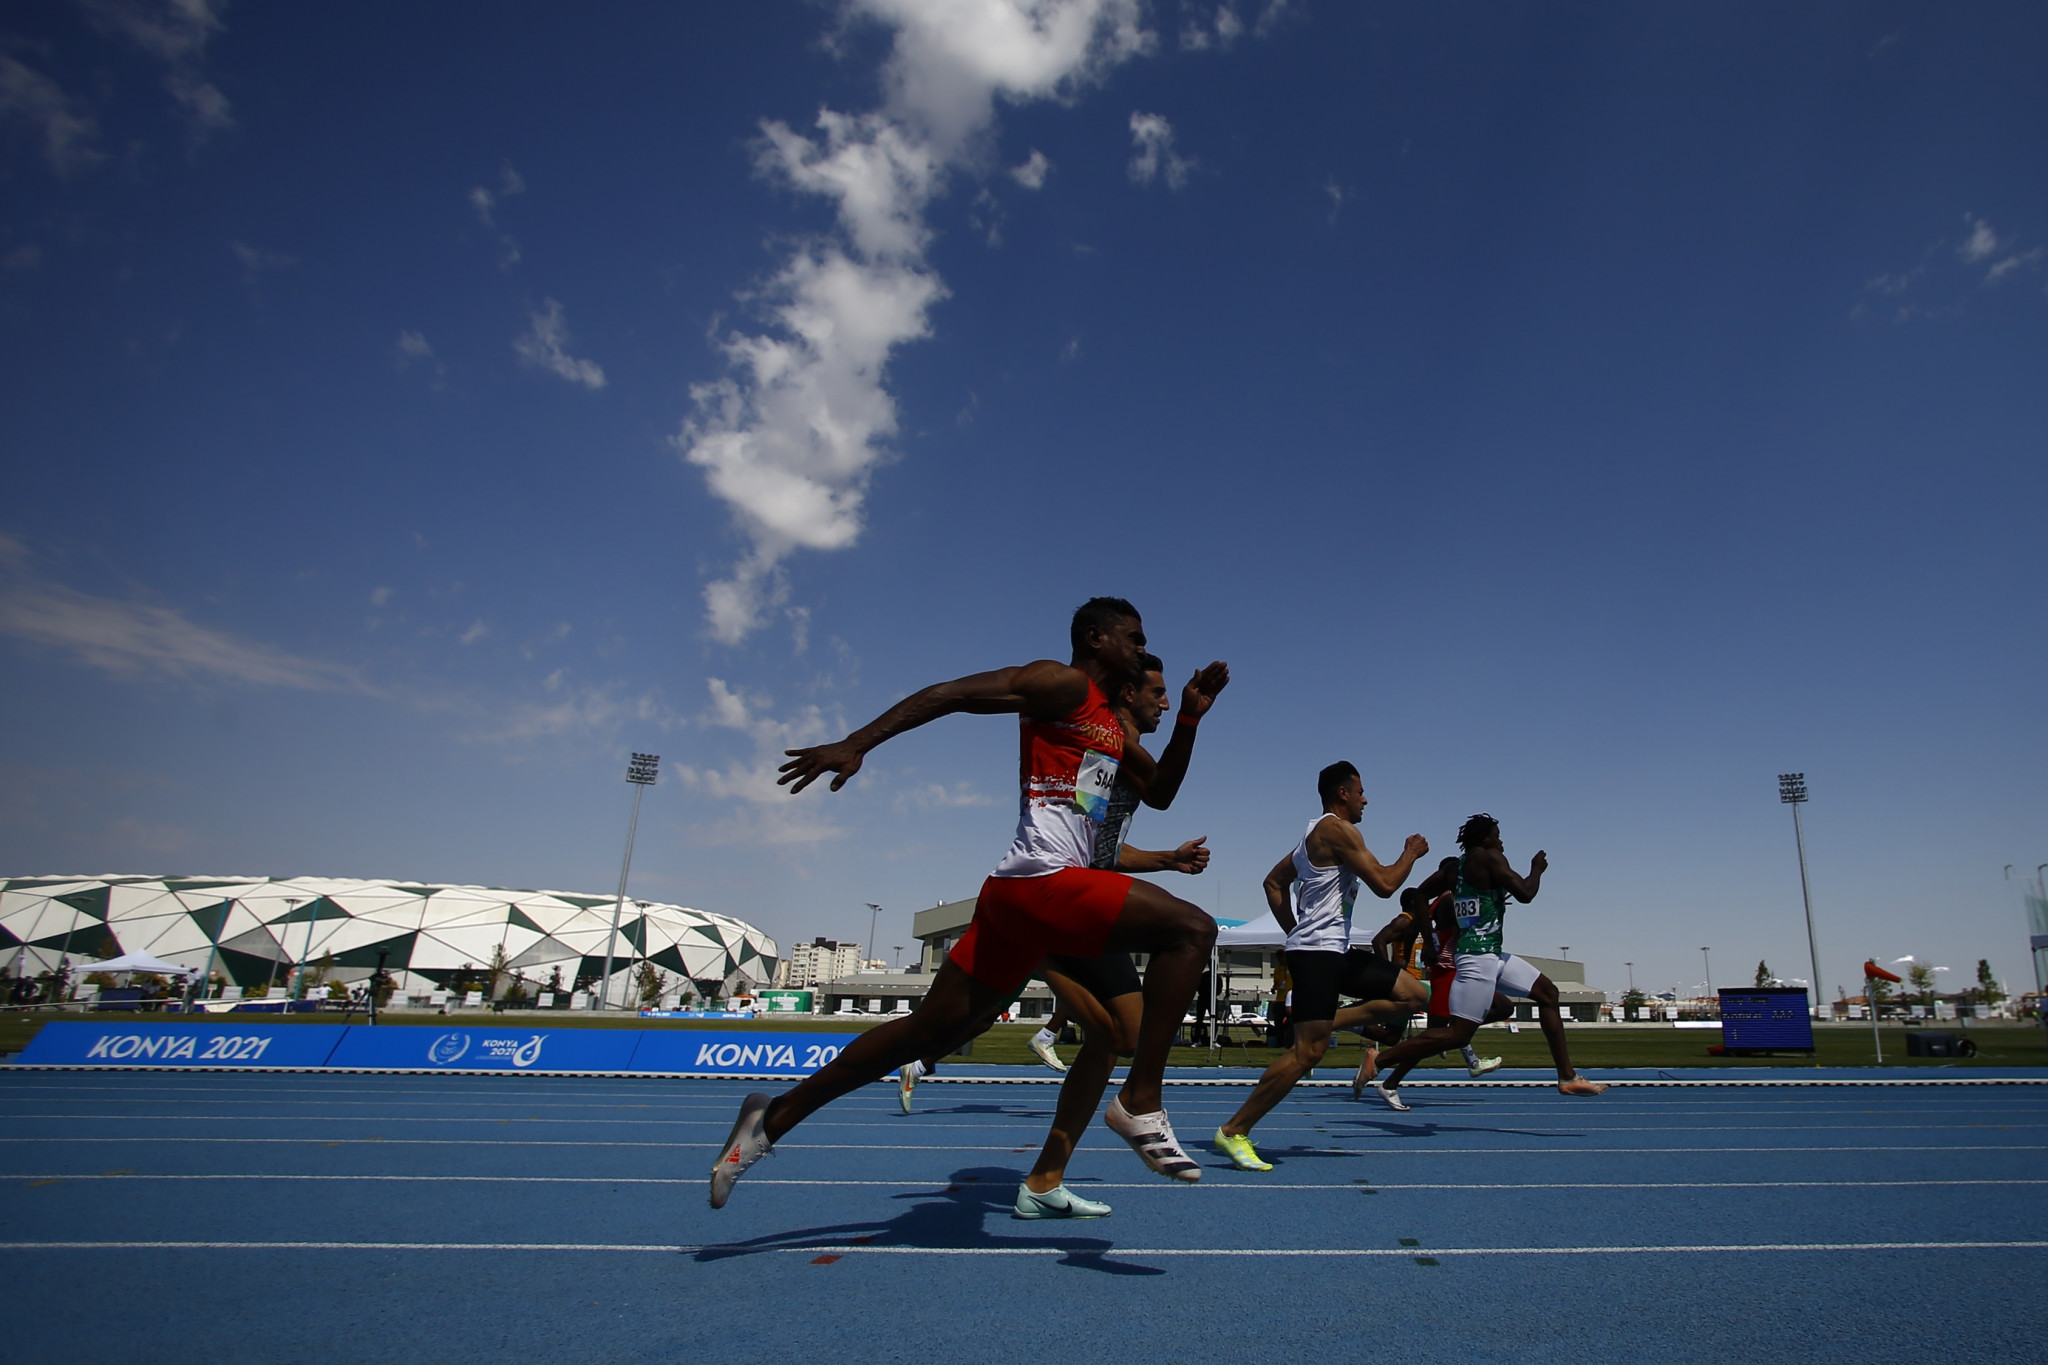 The men's and women's 100m finals were among the races affected by the faulty system ©Konya 2021